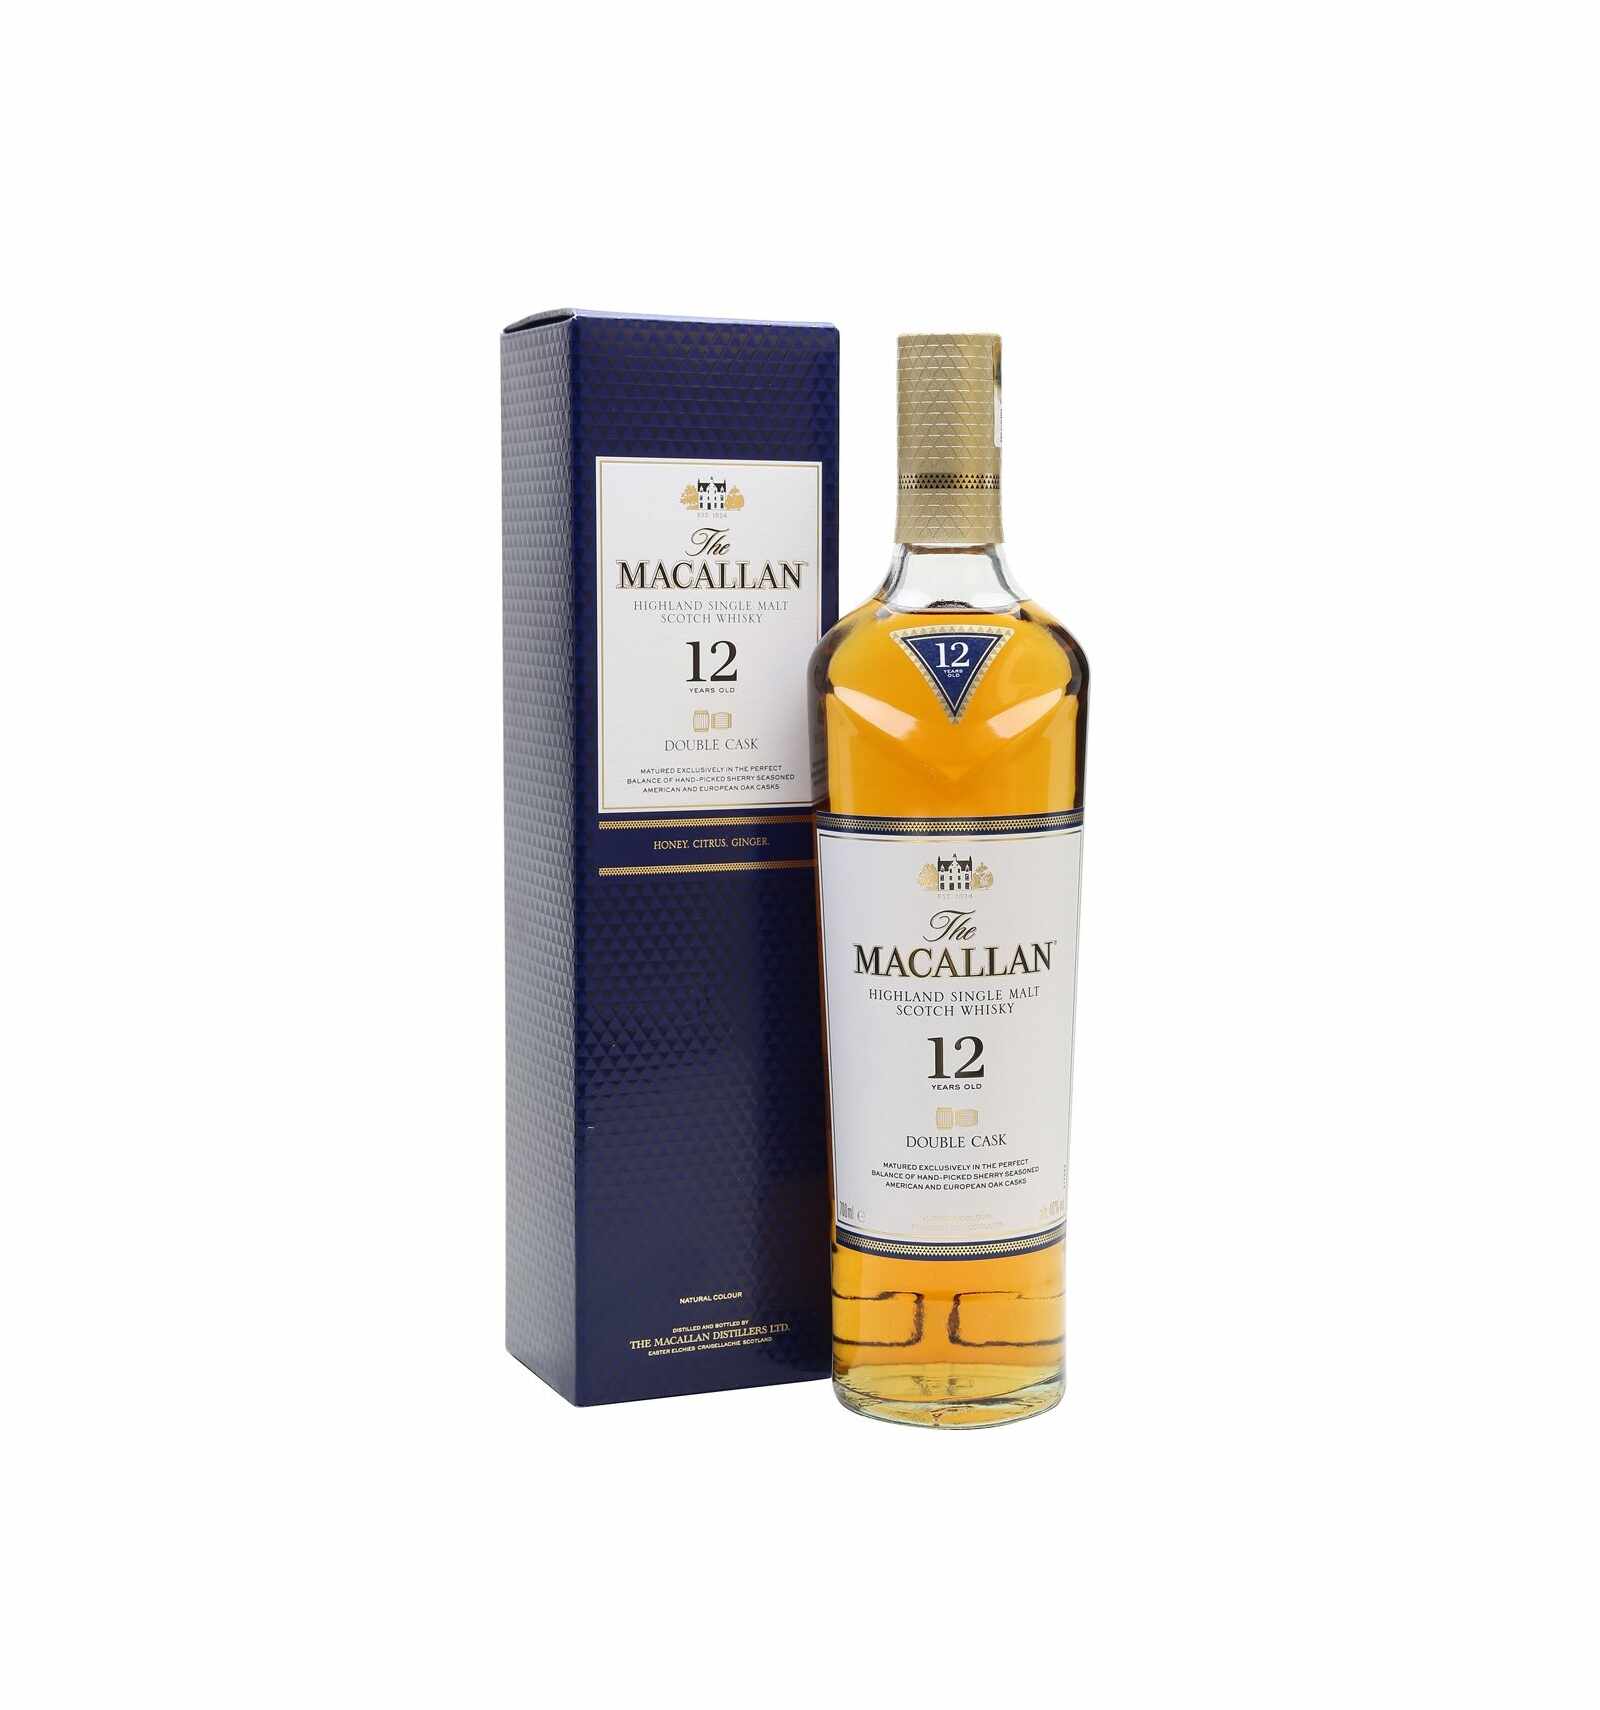 Whisky The Macallan Double Cask, 12 ani, 40% alc., 0.7L, Scotia